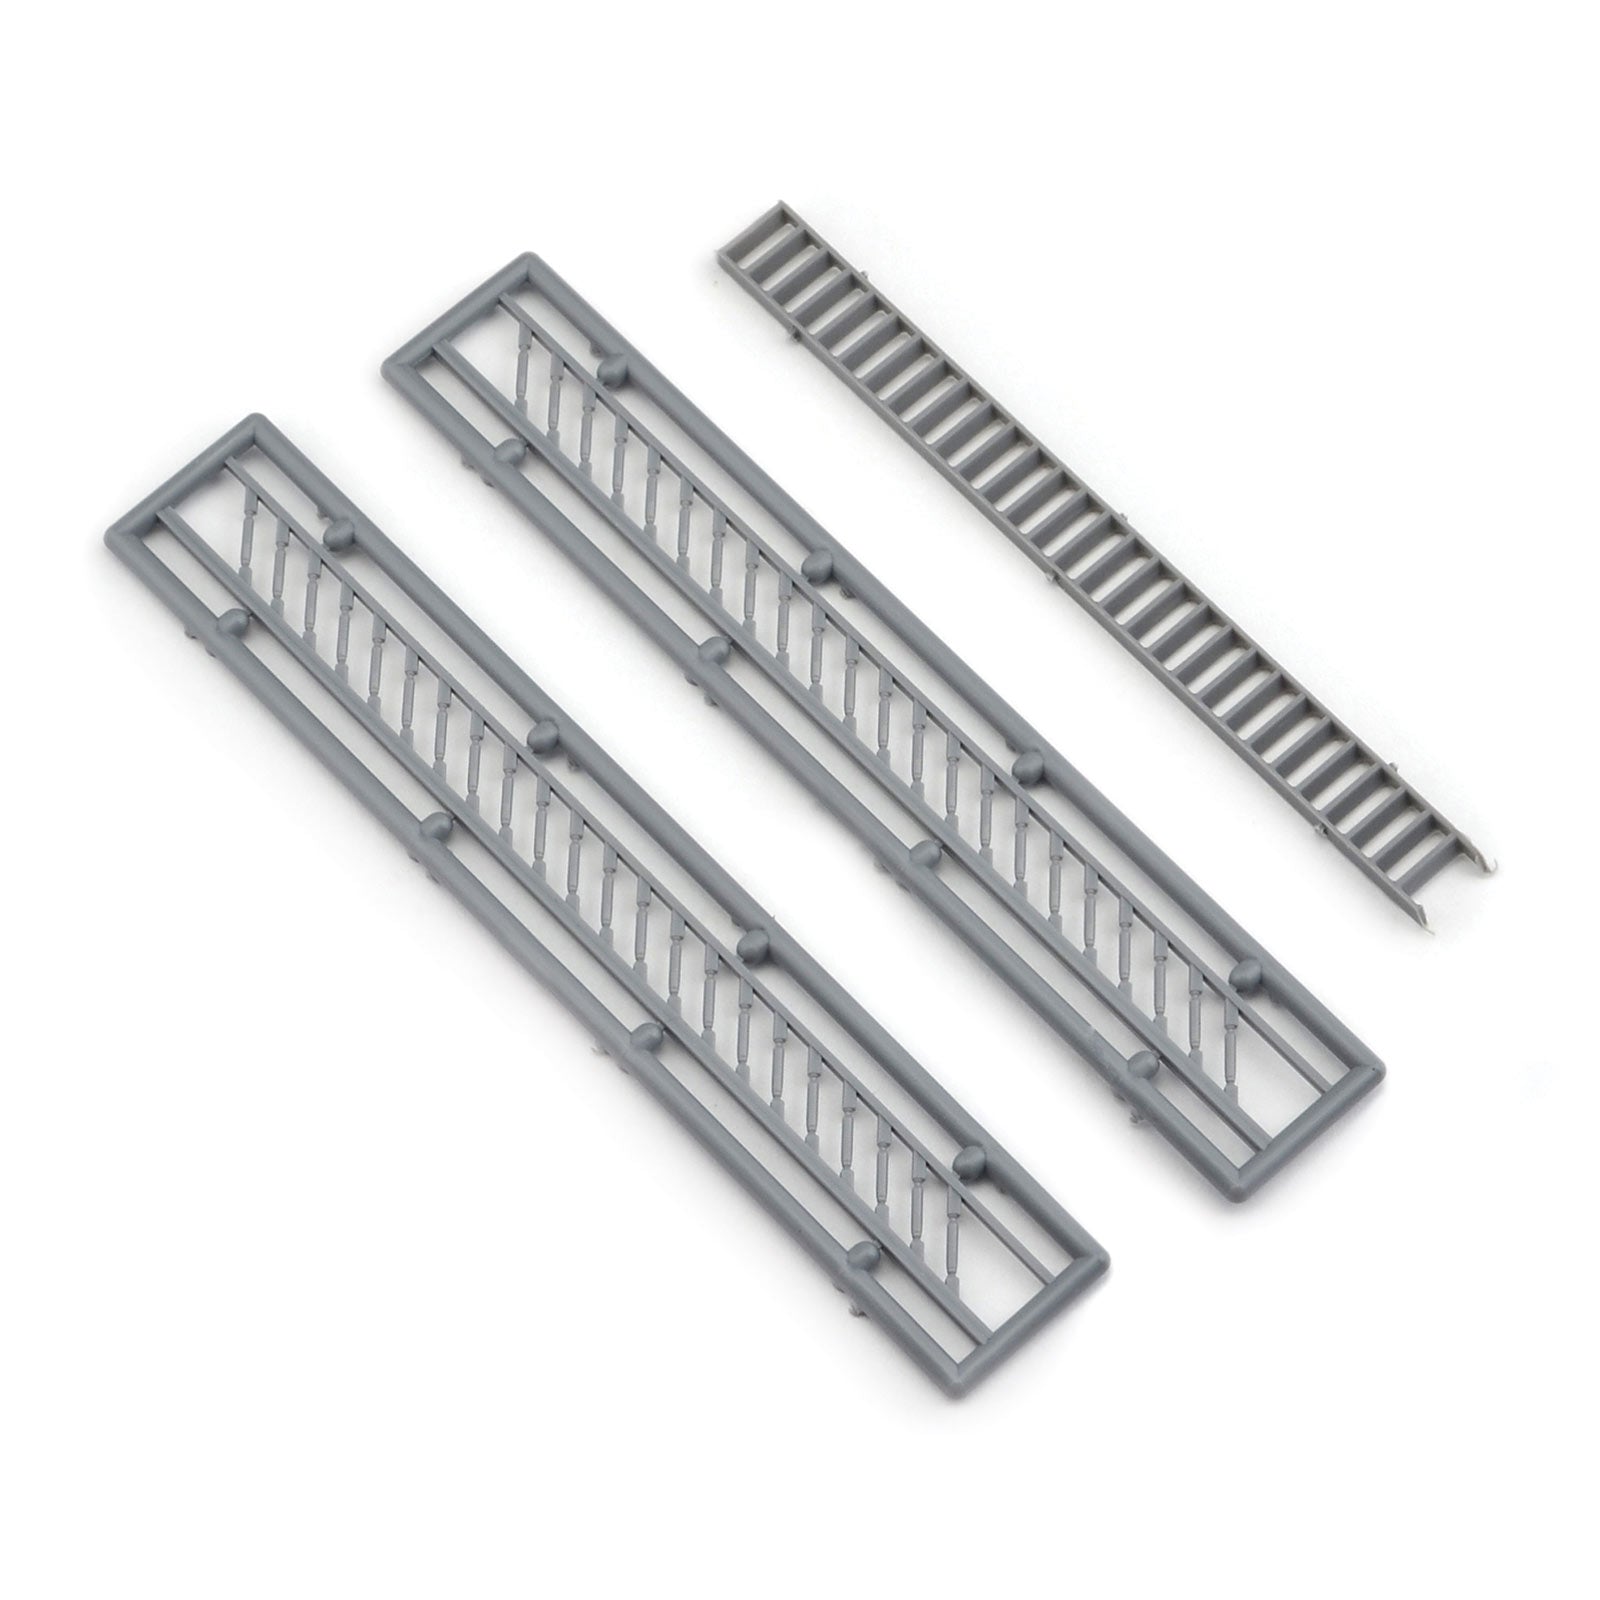 HO Scale Spindle Stair Rails and Stairs, Package of 2 Sets